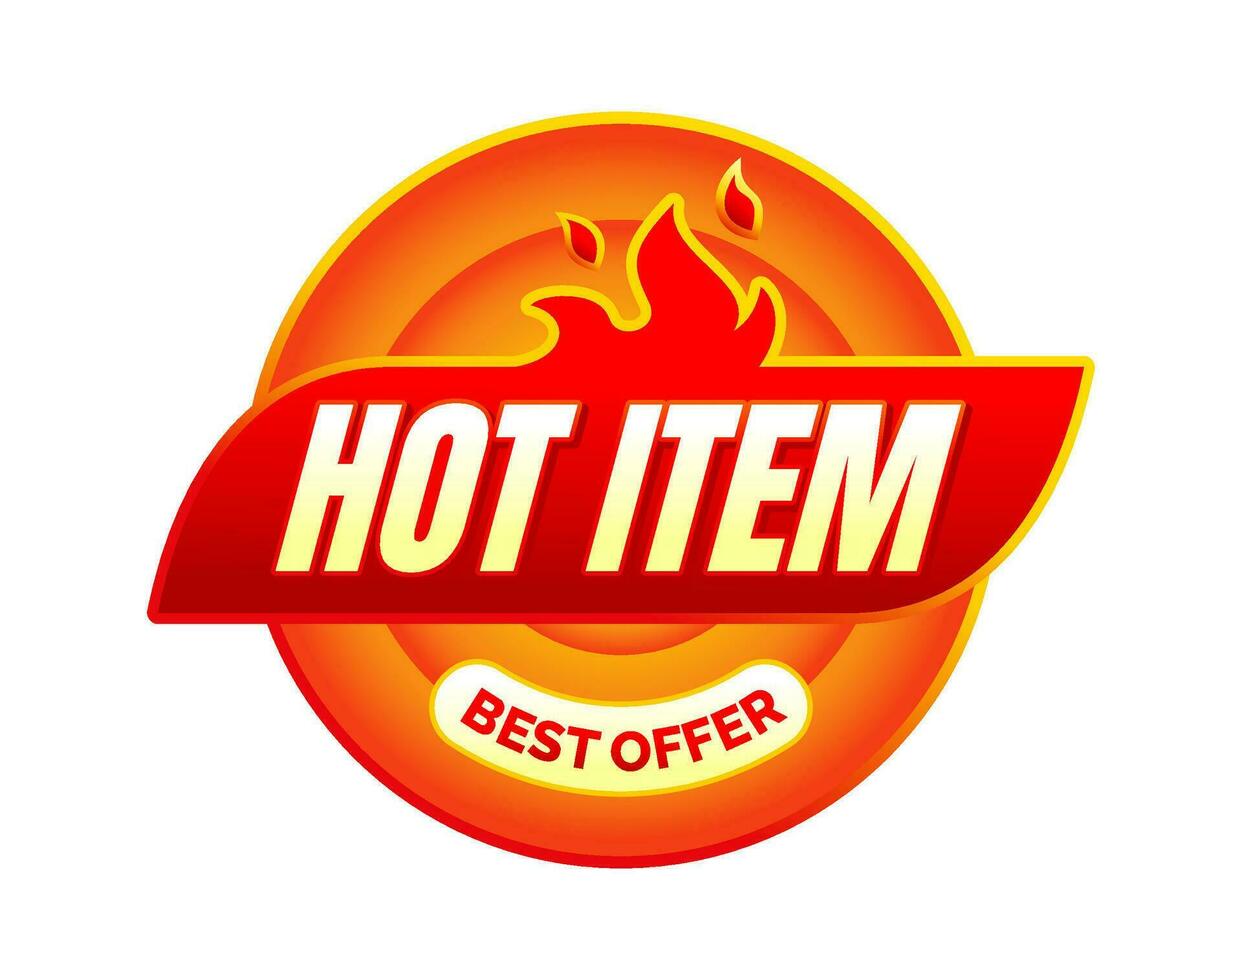 Vector hot item label design with red circle. for banner, icon, logo, sign, seal, symbol, badge, stamp, sticker, etc.